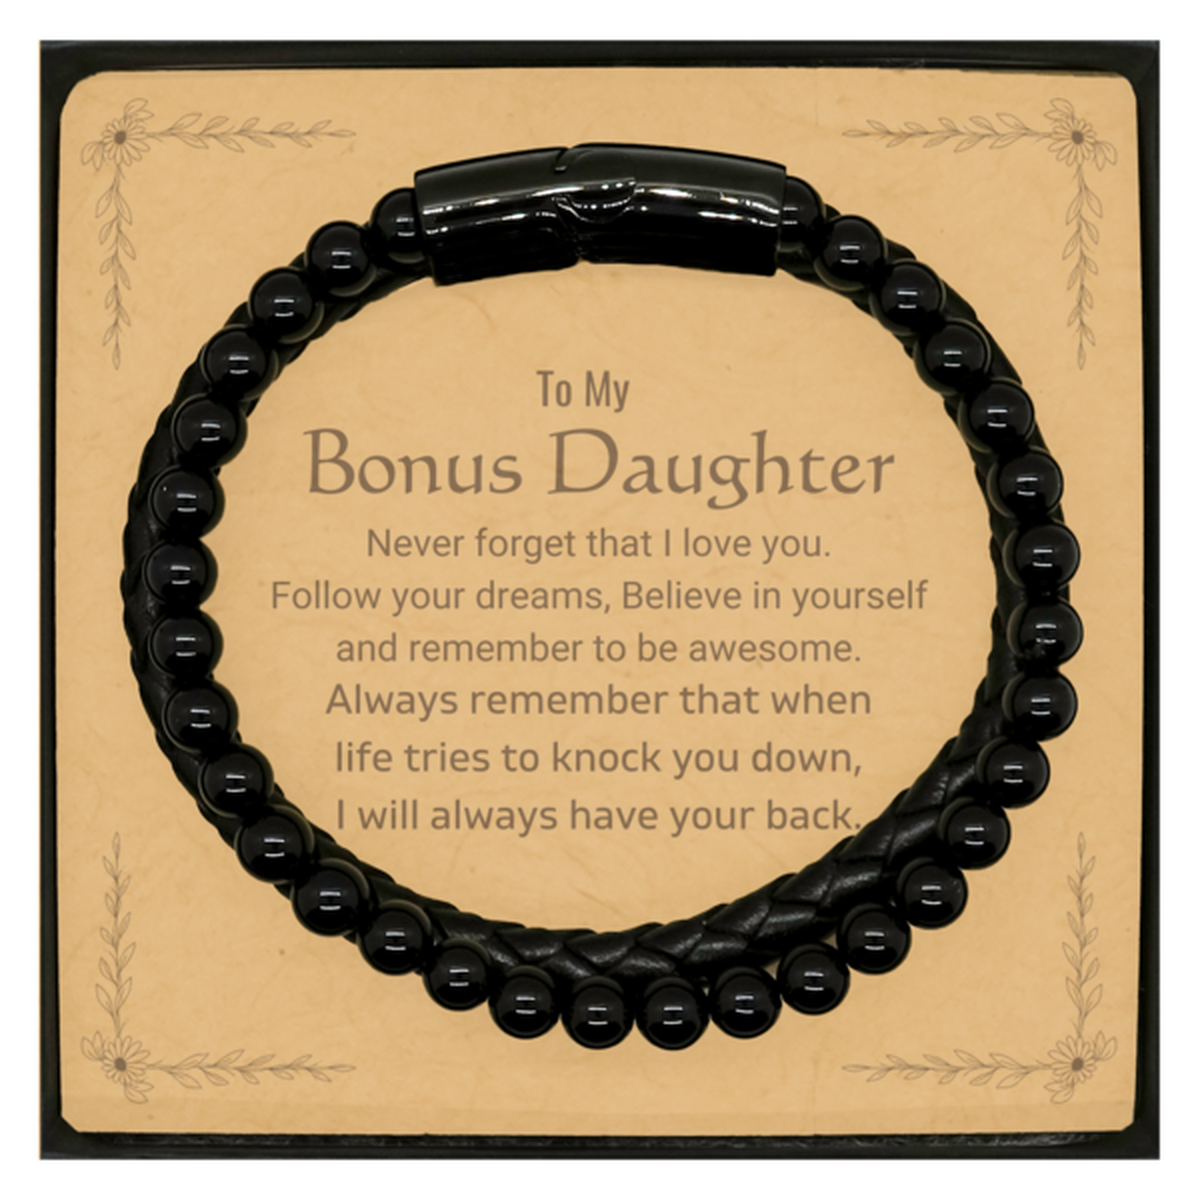 Inspirational Gifts for Bonus Daughter, Follow your dreams, Believe in yourself, Bonus Daughter Stone Leather Bracelets, Birthday Christmas Unique Gifts For Bonus Daughter